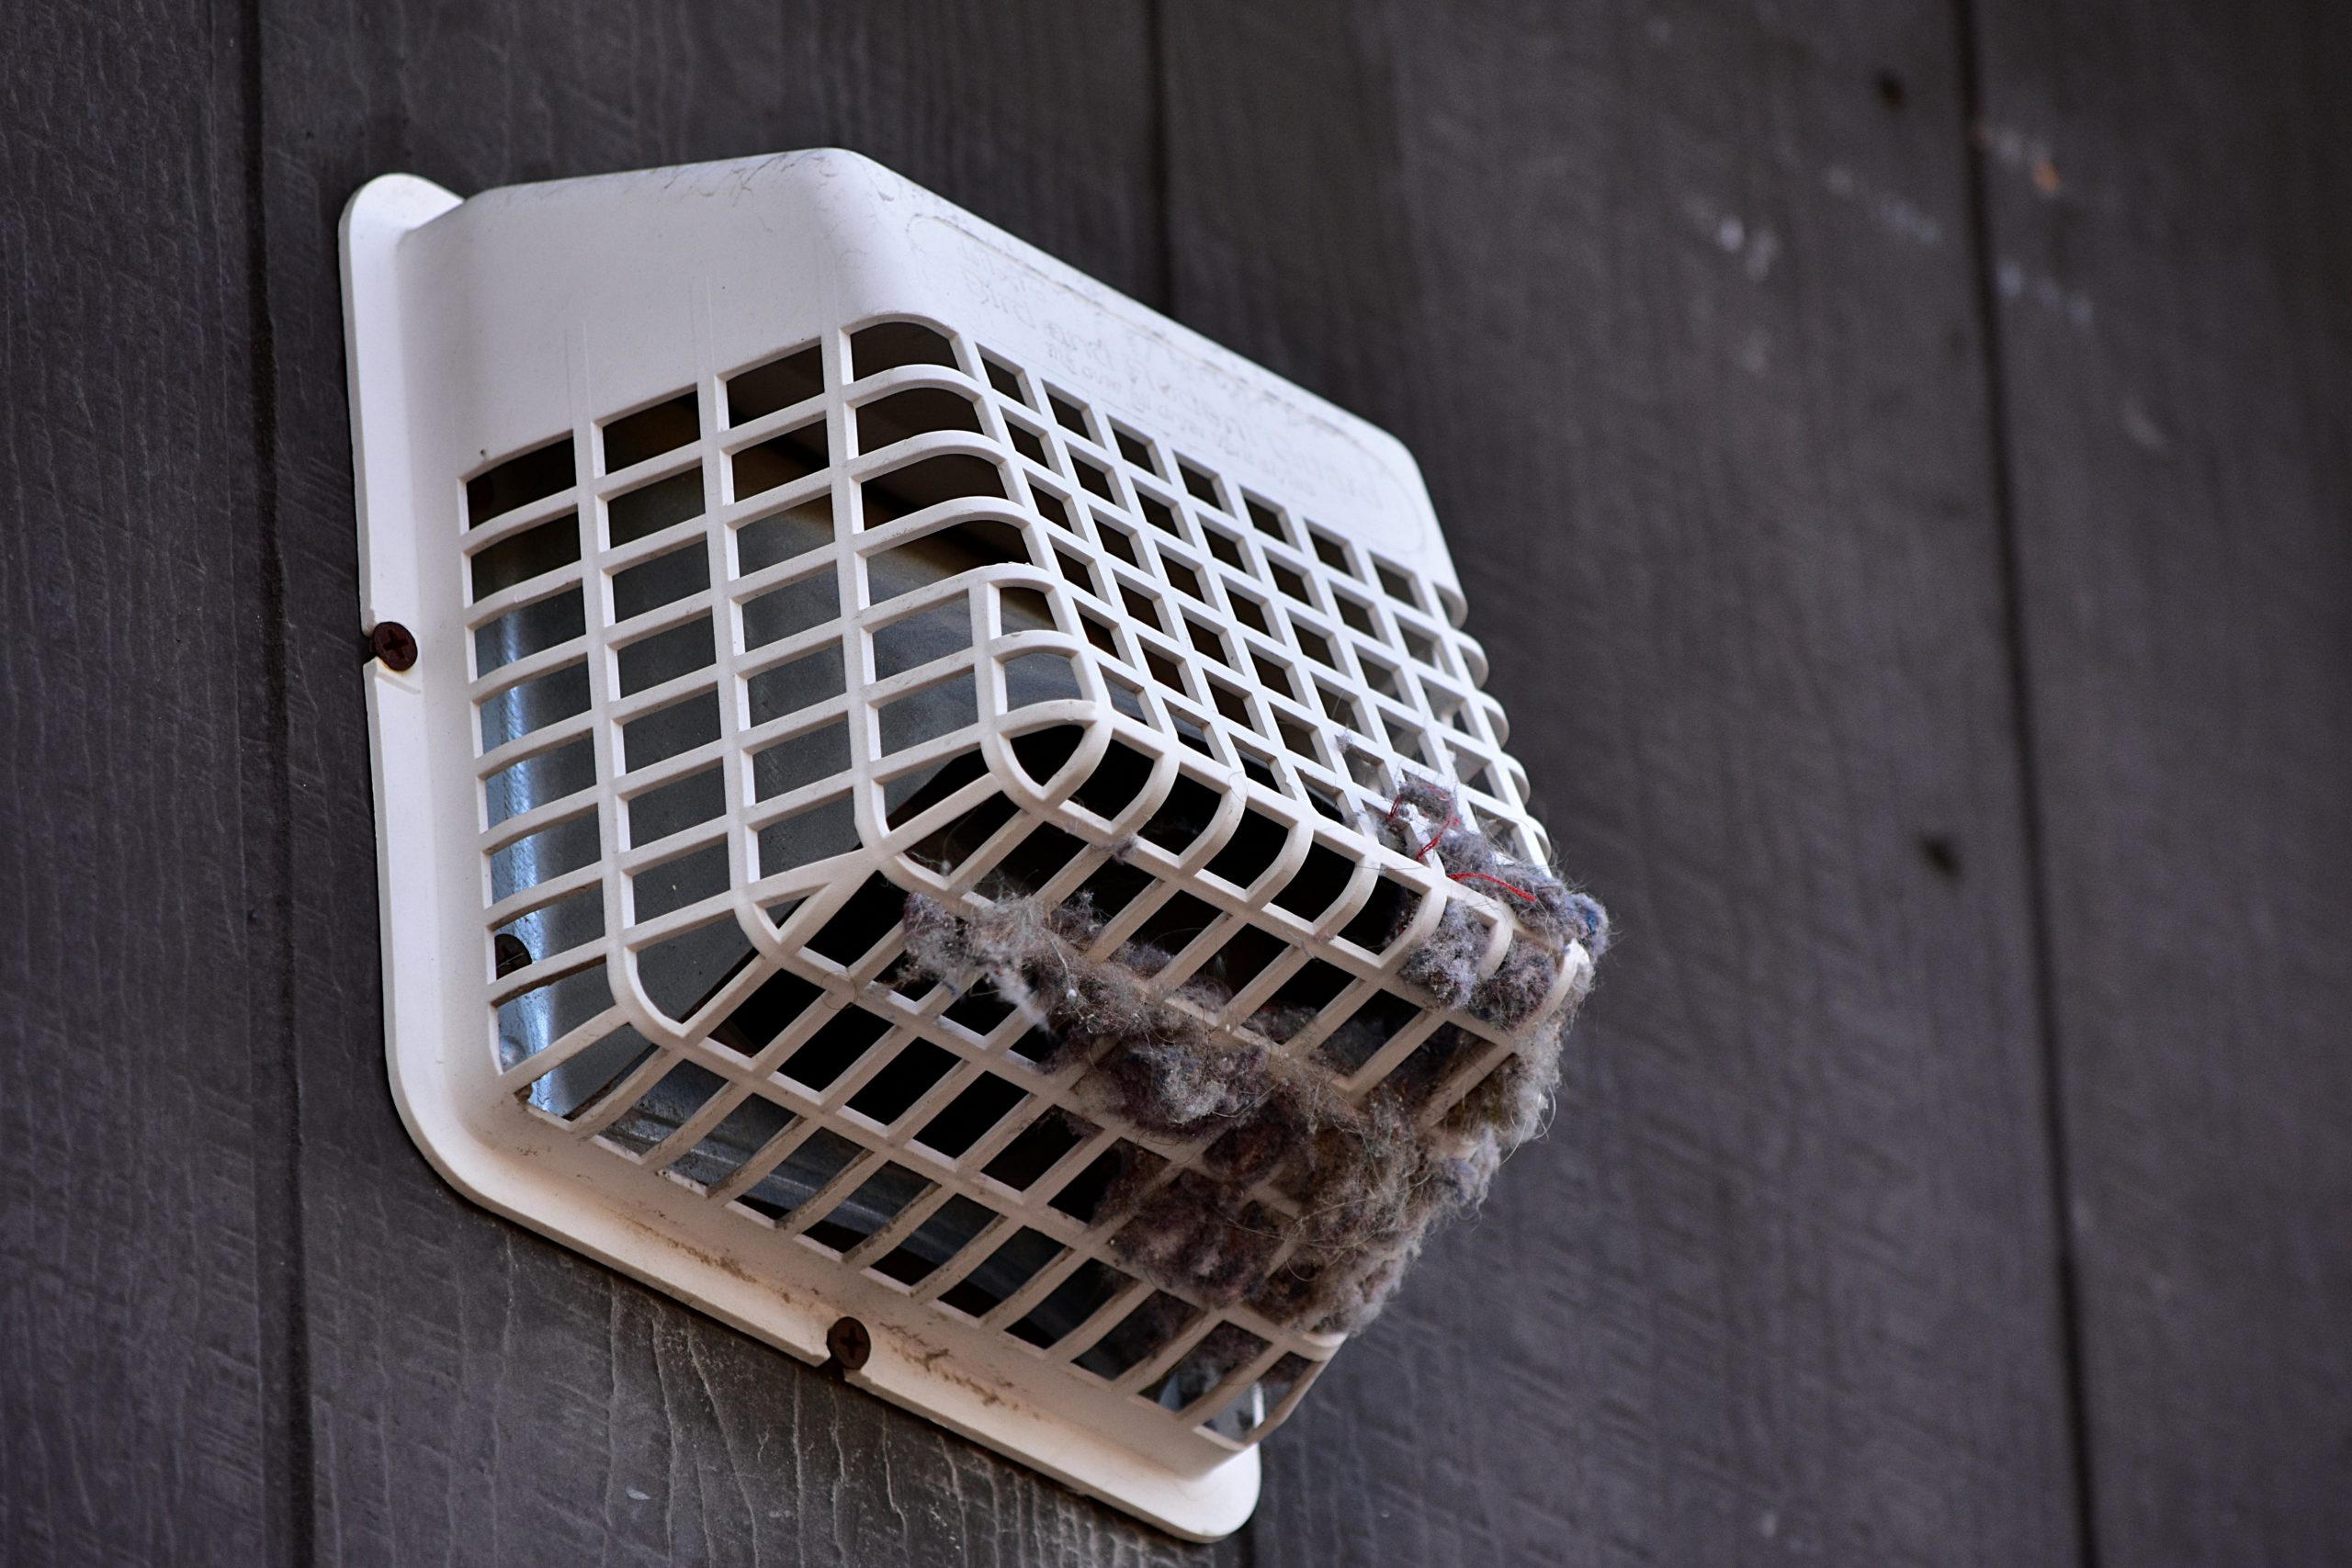 Dealing With A Dryer Vent Mold Problem?